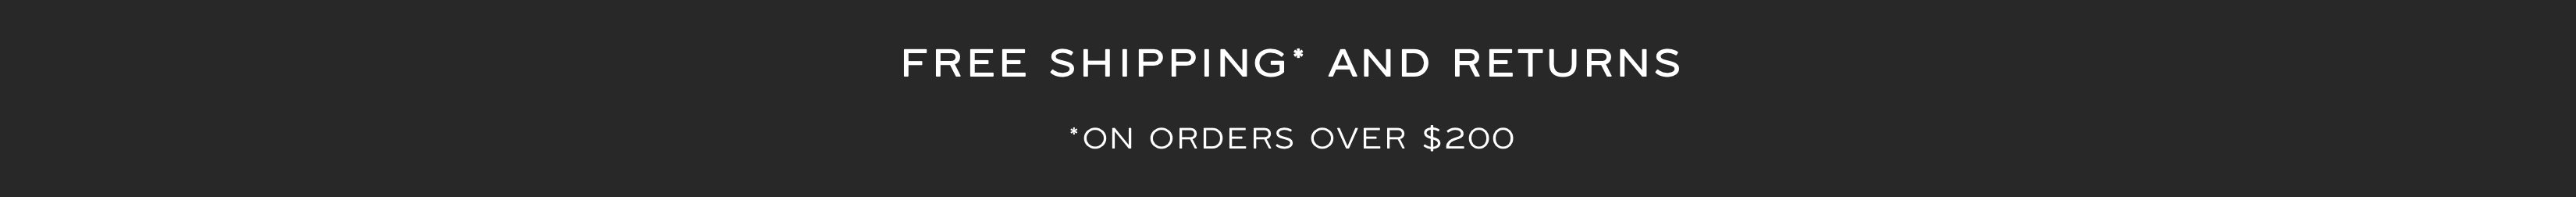 Free Shipping on Orders over $200